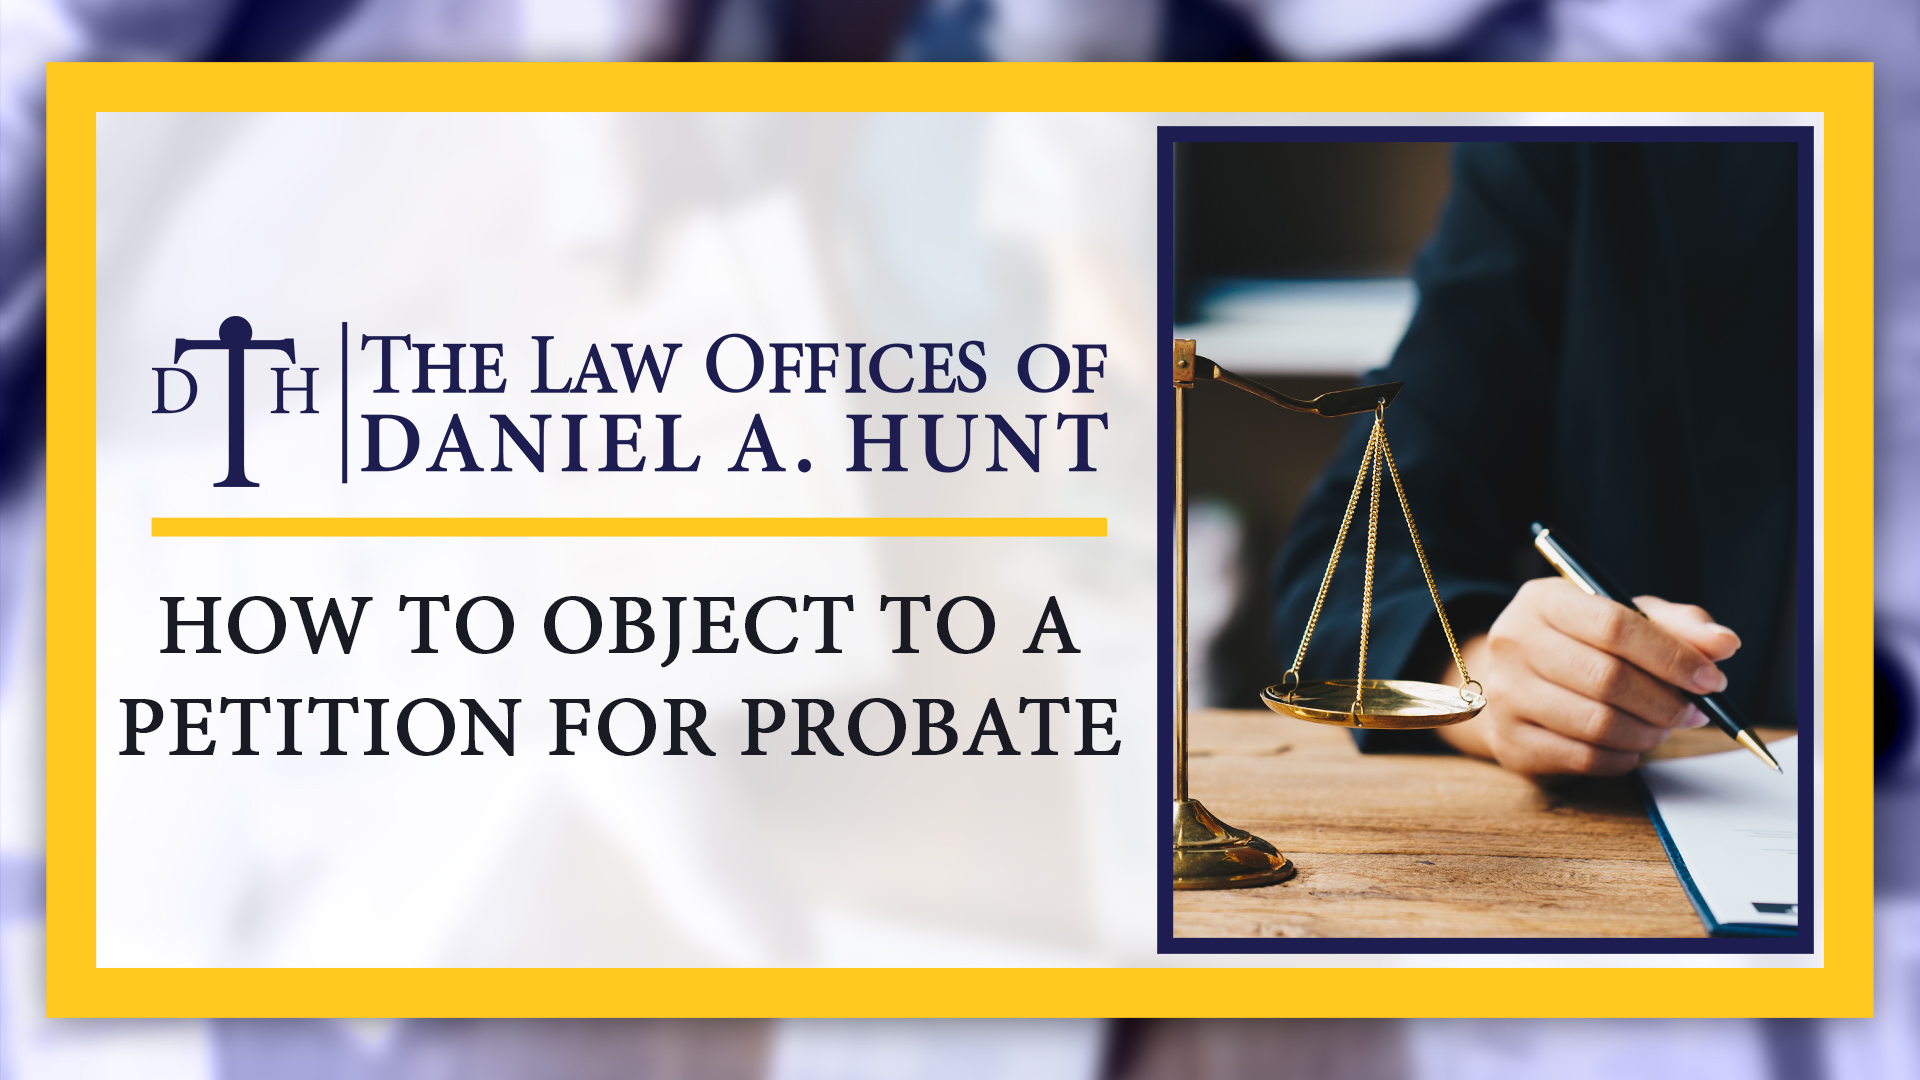 How to Object to a Petition for Probate